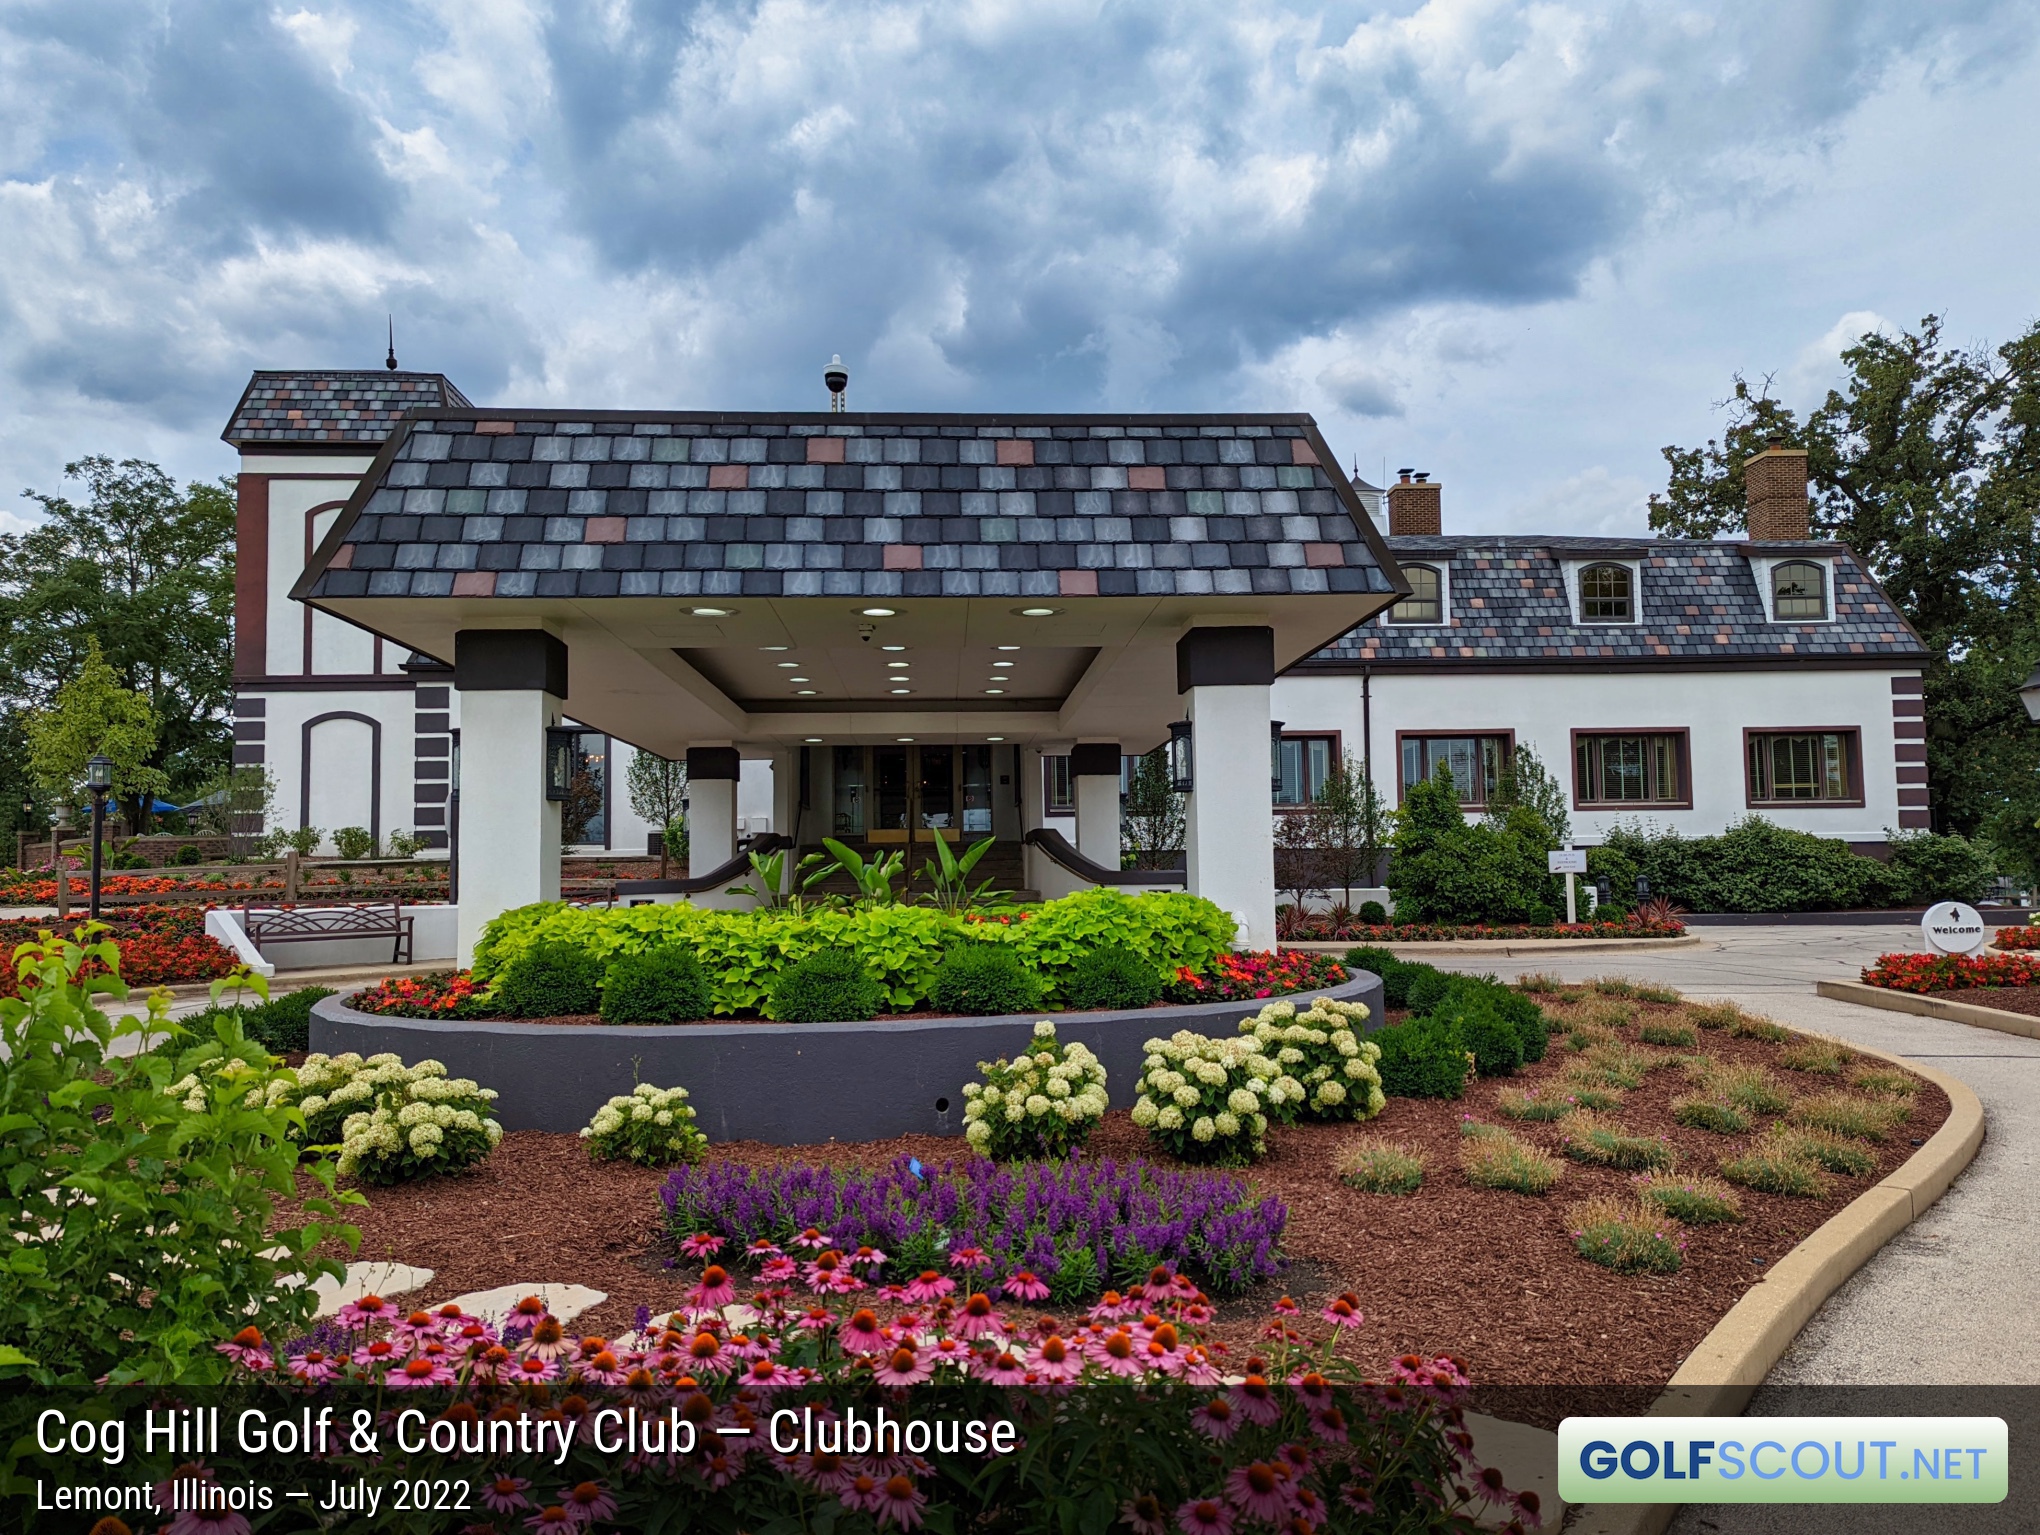 Photo of the clubhouse at Cog Hill Course #3 in Lemont, Illinois. The main clubhouse building at Cog Hill, which has the banquet hall and nice restaurant.